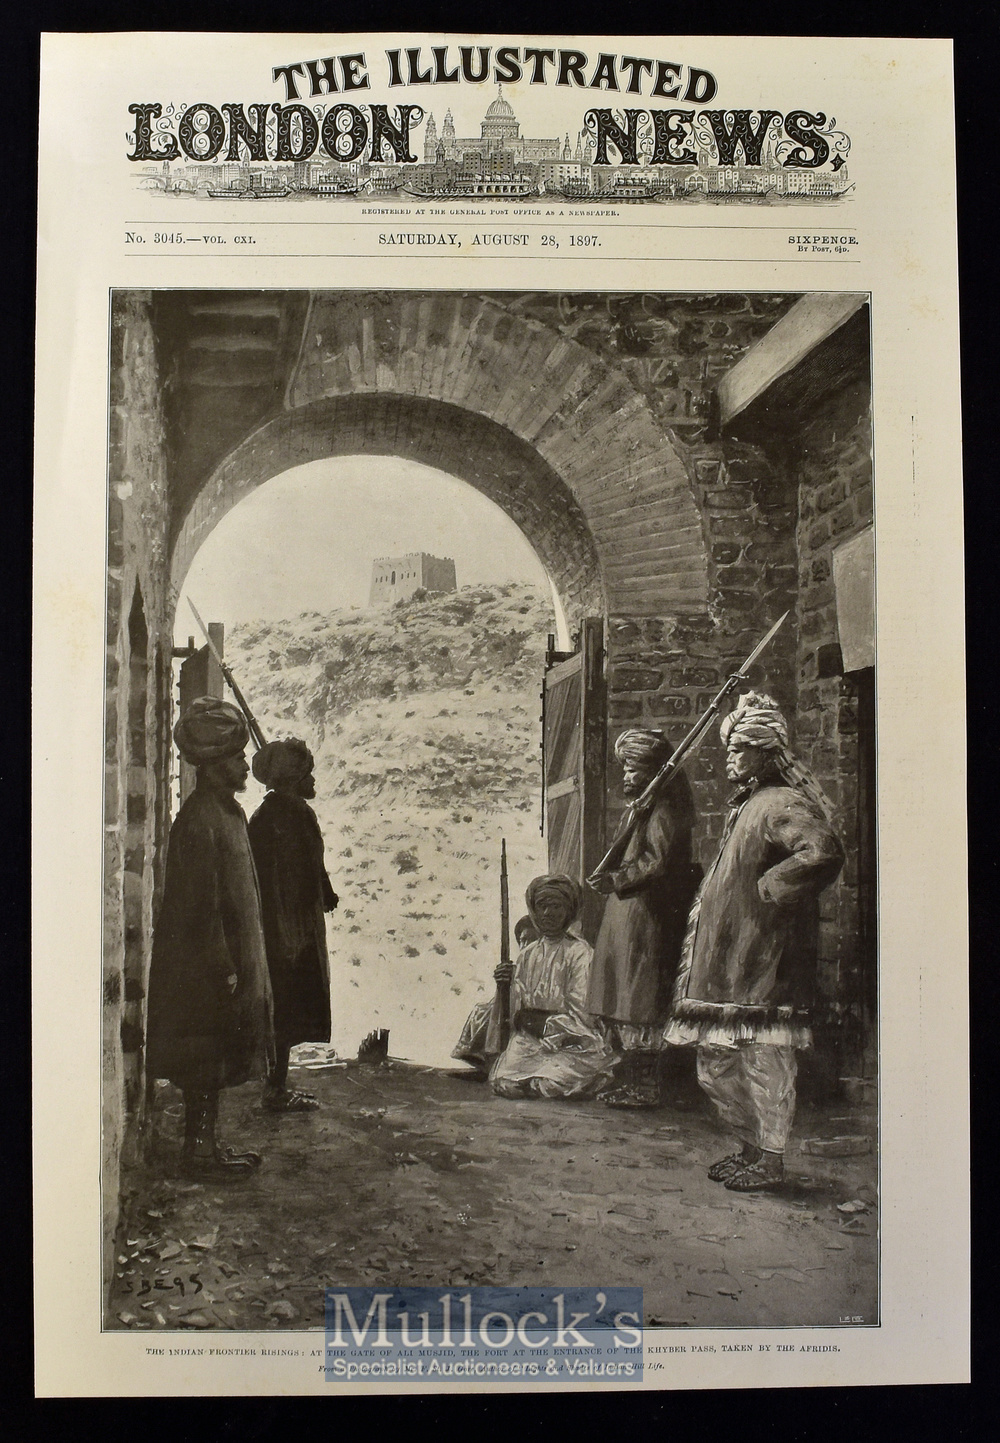 India - 1897 The Indian Frontier Rising: At the gate of Ali Musjid, the fort at the entrance of